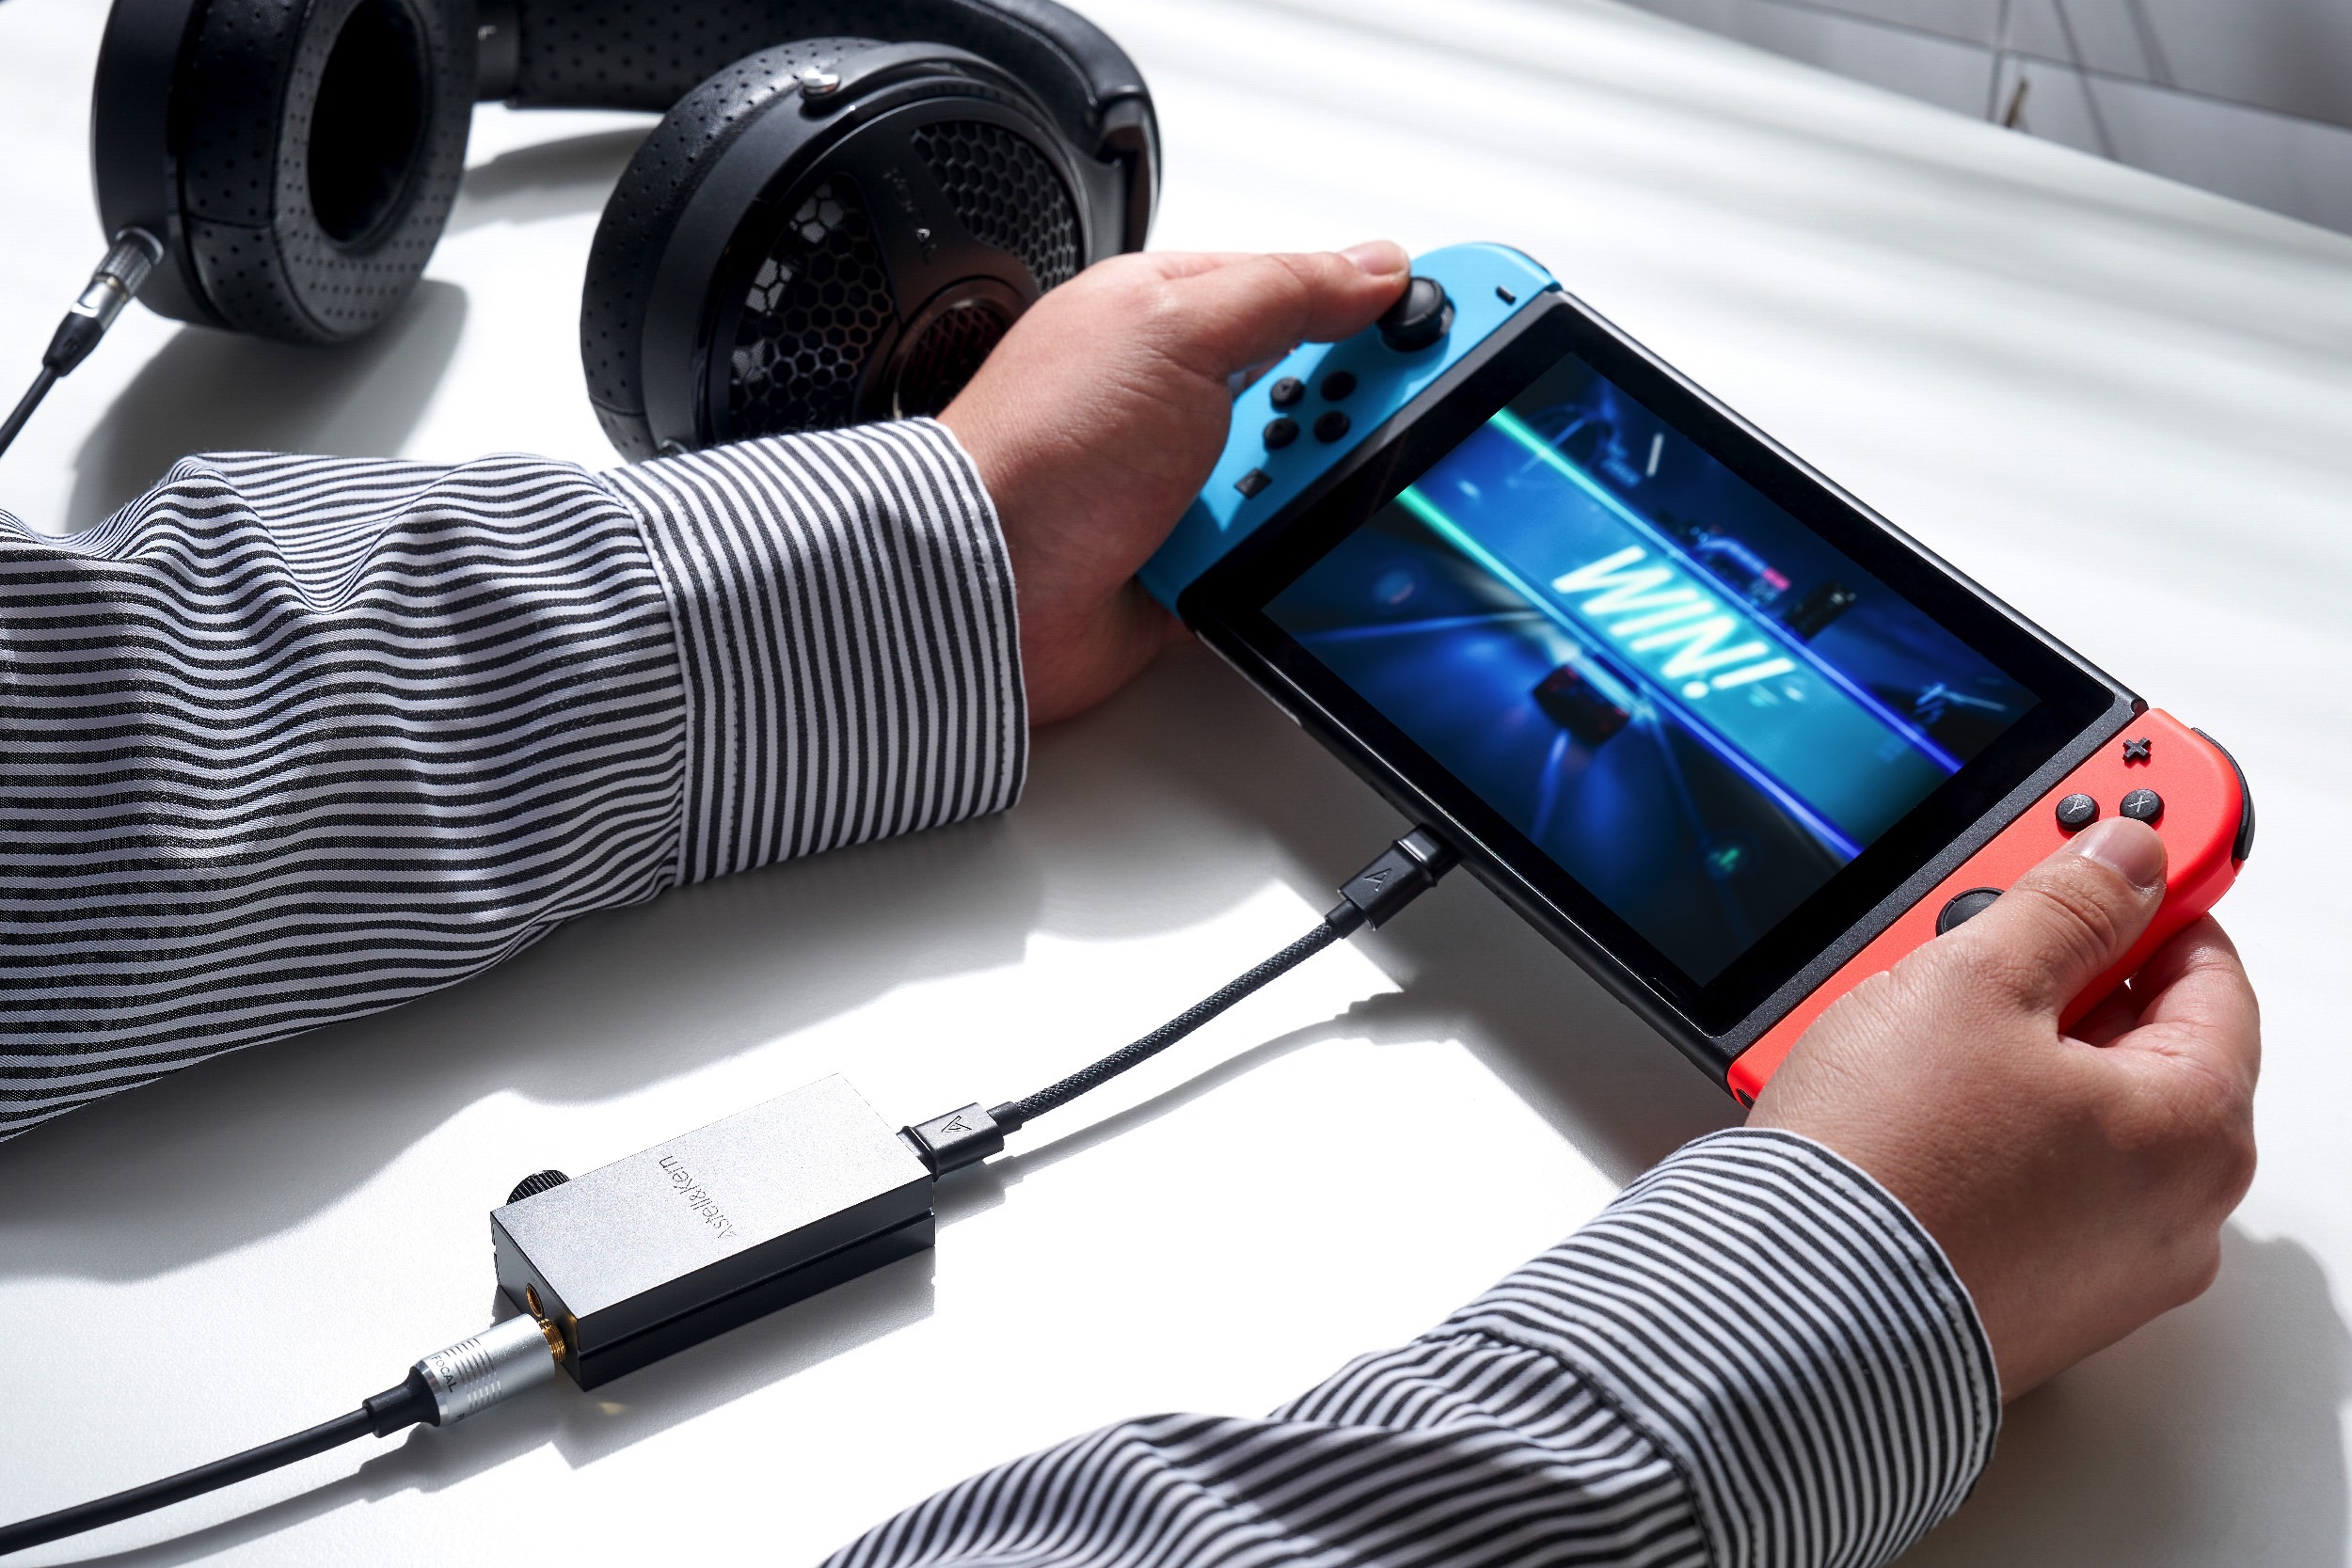 Astell&Kern HB1 Bluetooth DAC/amp seen with portable game console.